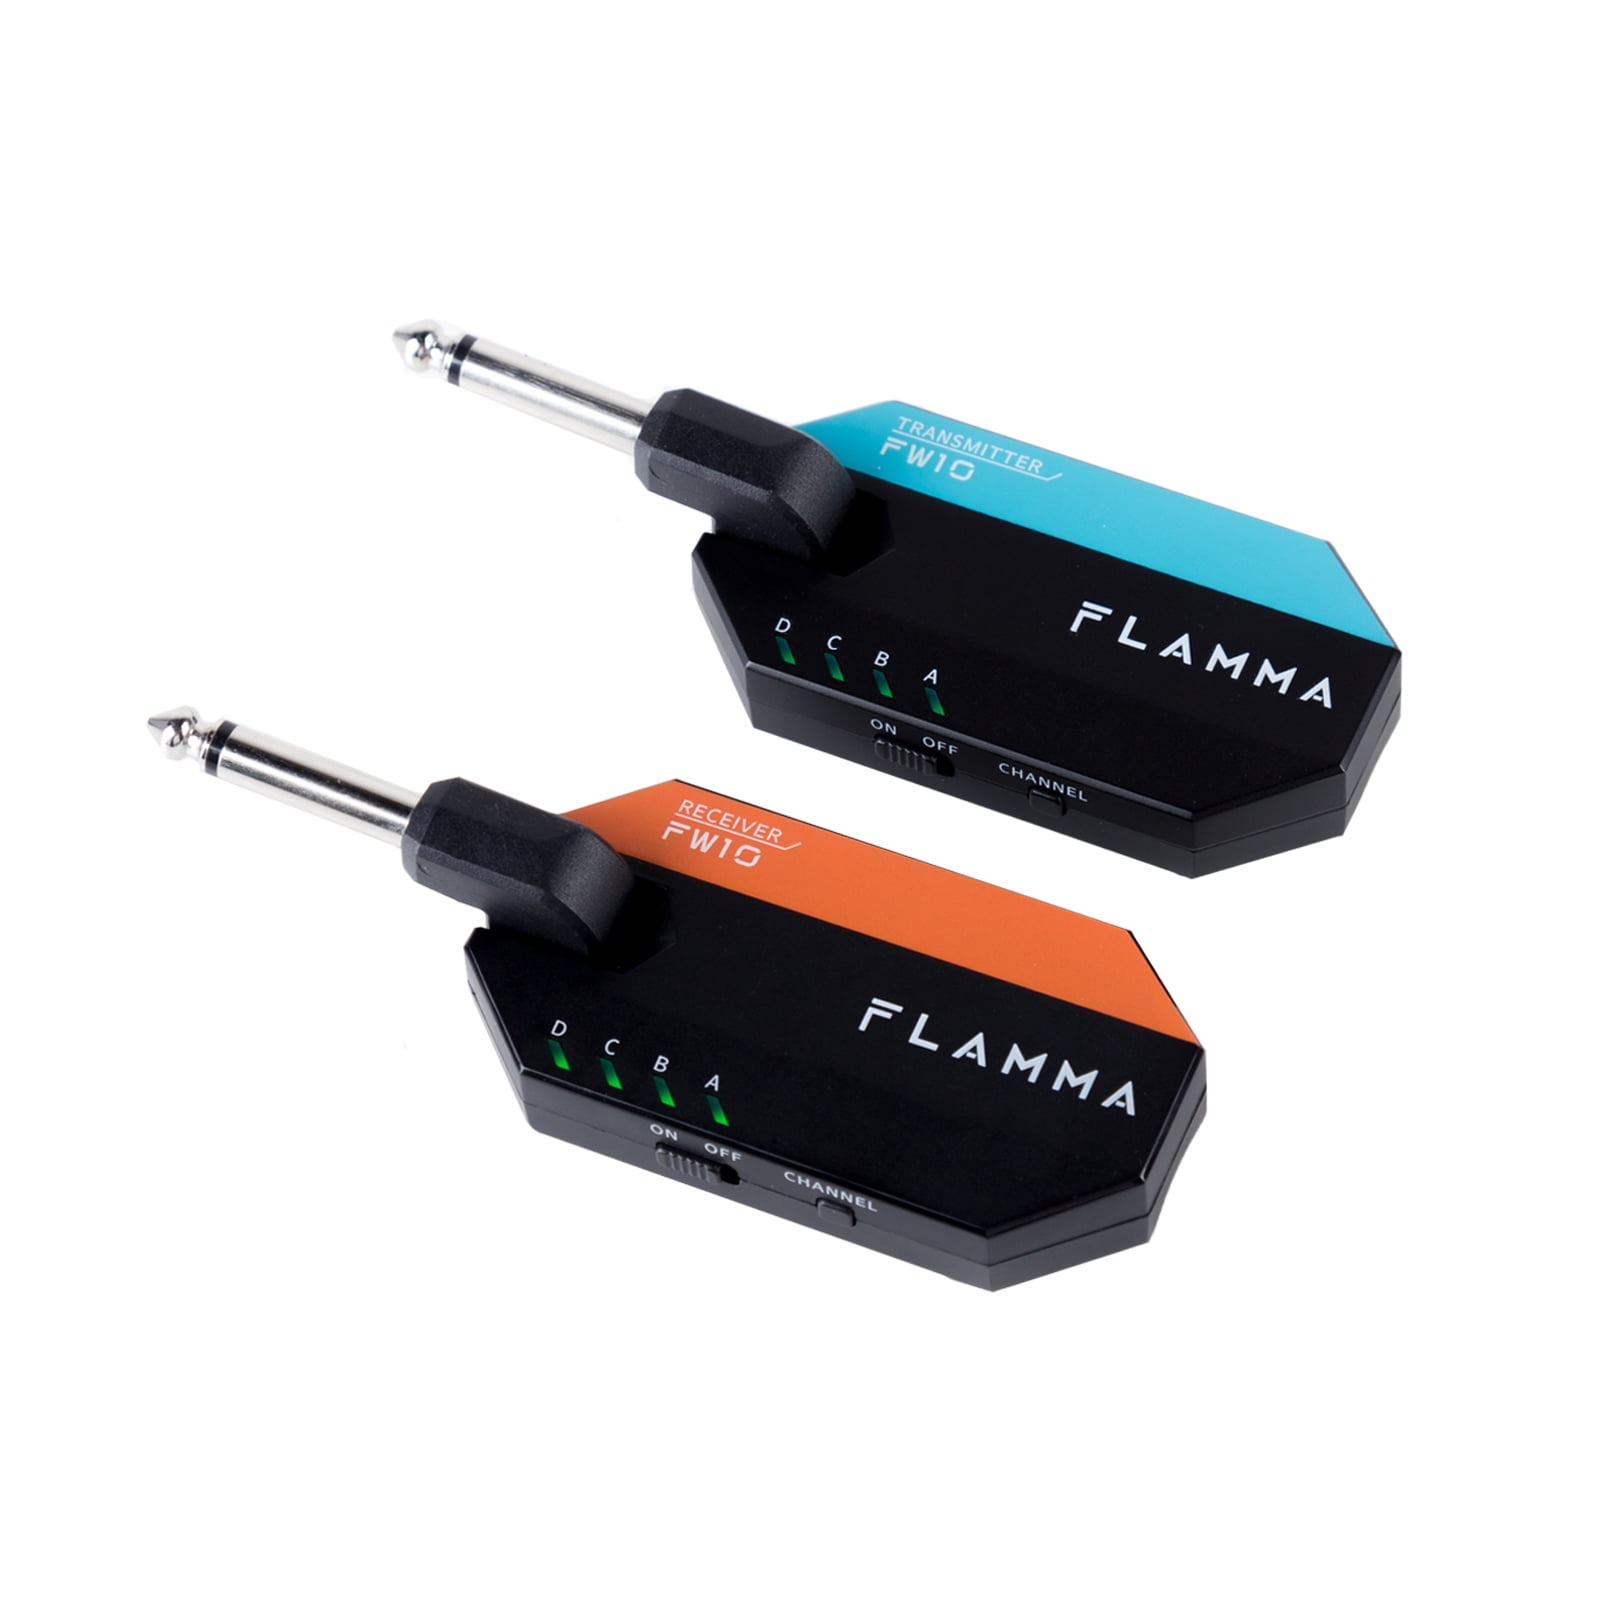 FLAMMA FW10 Digital Wireless Guitar System 2.4GHZ Rechargeable Transmitter Receiver Support 4 Channel For Electric Guitar Bass Violin Keyboard 